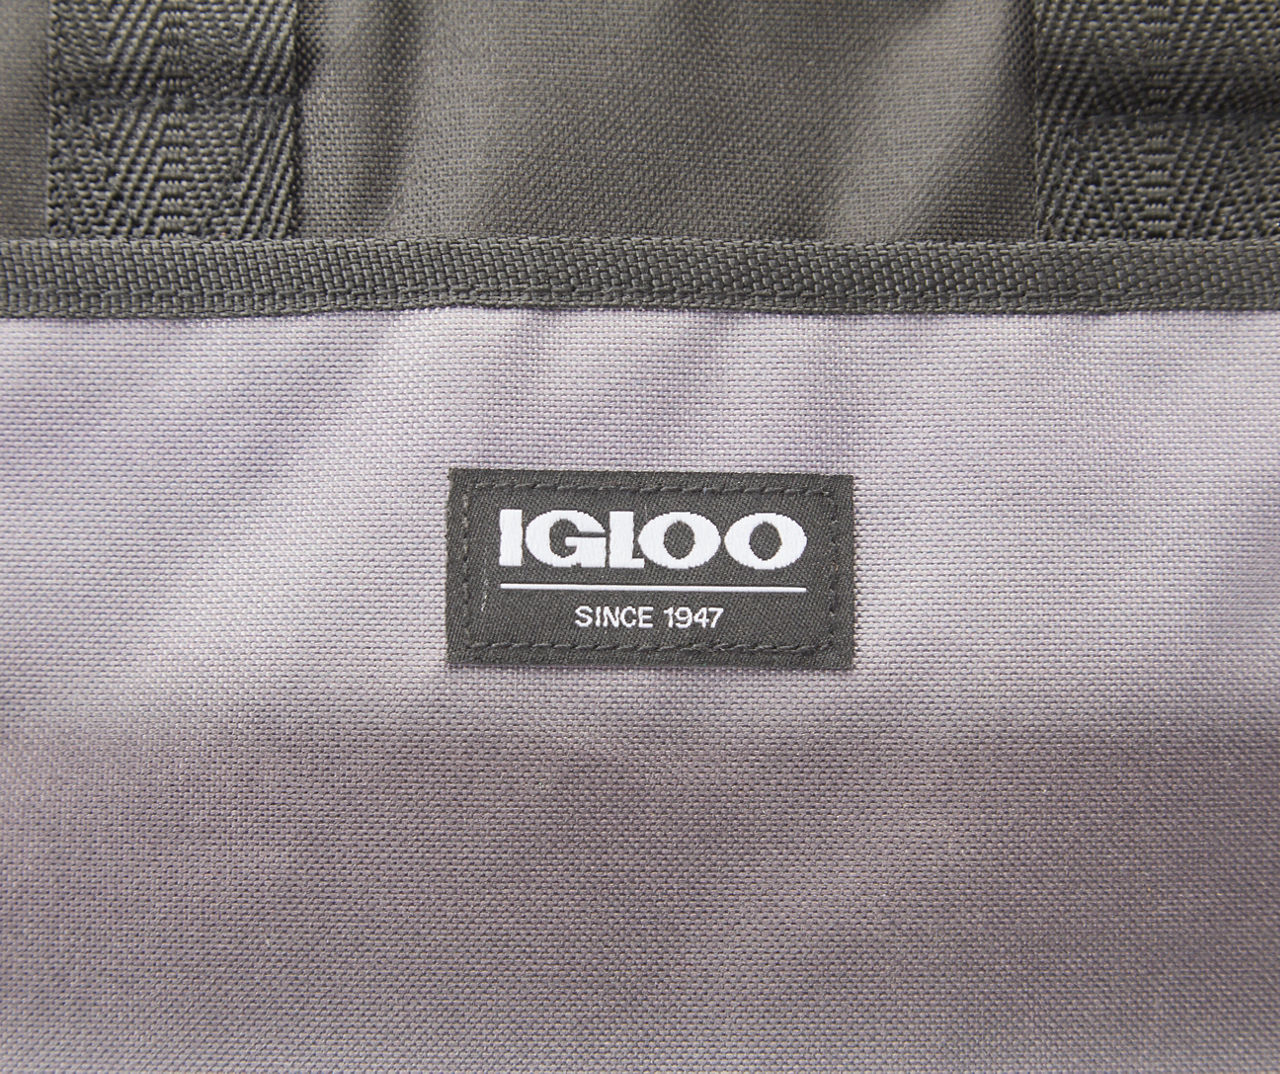 Igloo 9 Can Leftover Tote Cooler Bag - Gray 